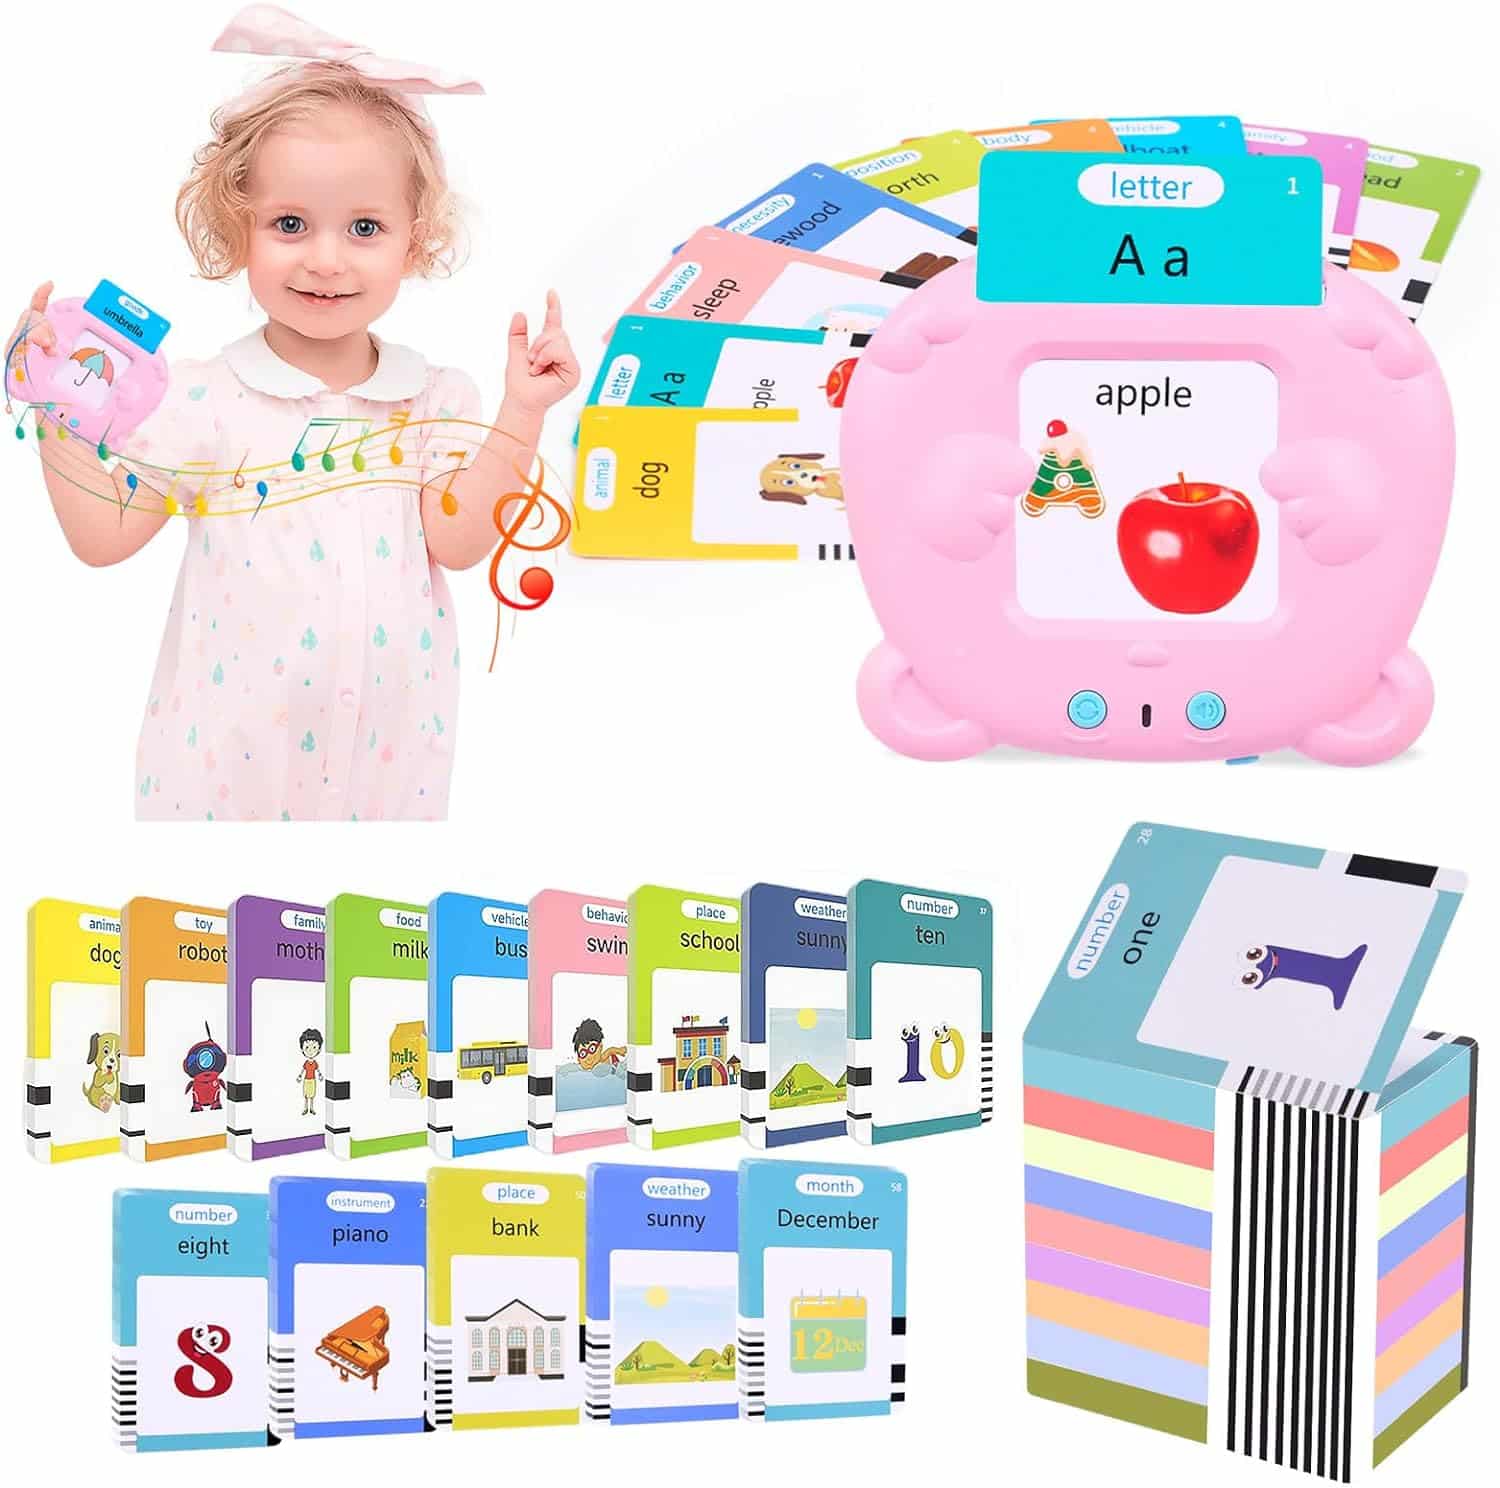 Toddle Toys for 2 3 4 5 Year Old Boys Girls Montessori Educational Learning Talking Flash Cards ABC Letters/Numbers/Shapes, Pocket Speech Autism Sensory Toy 510 Words Speech Therapy Toys Gift for Kids